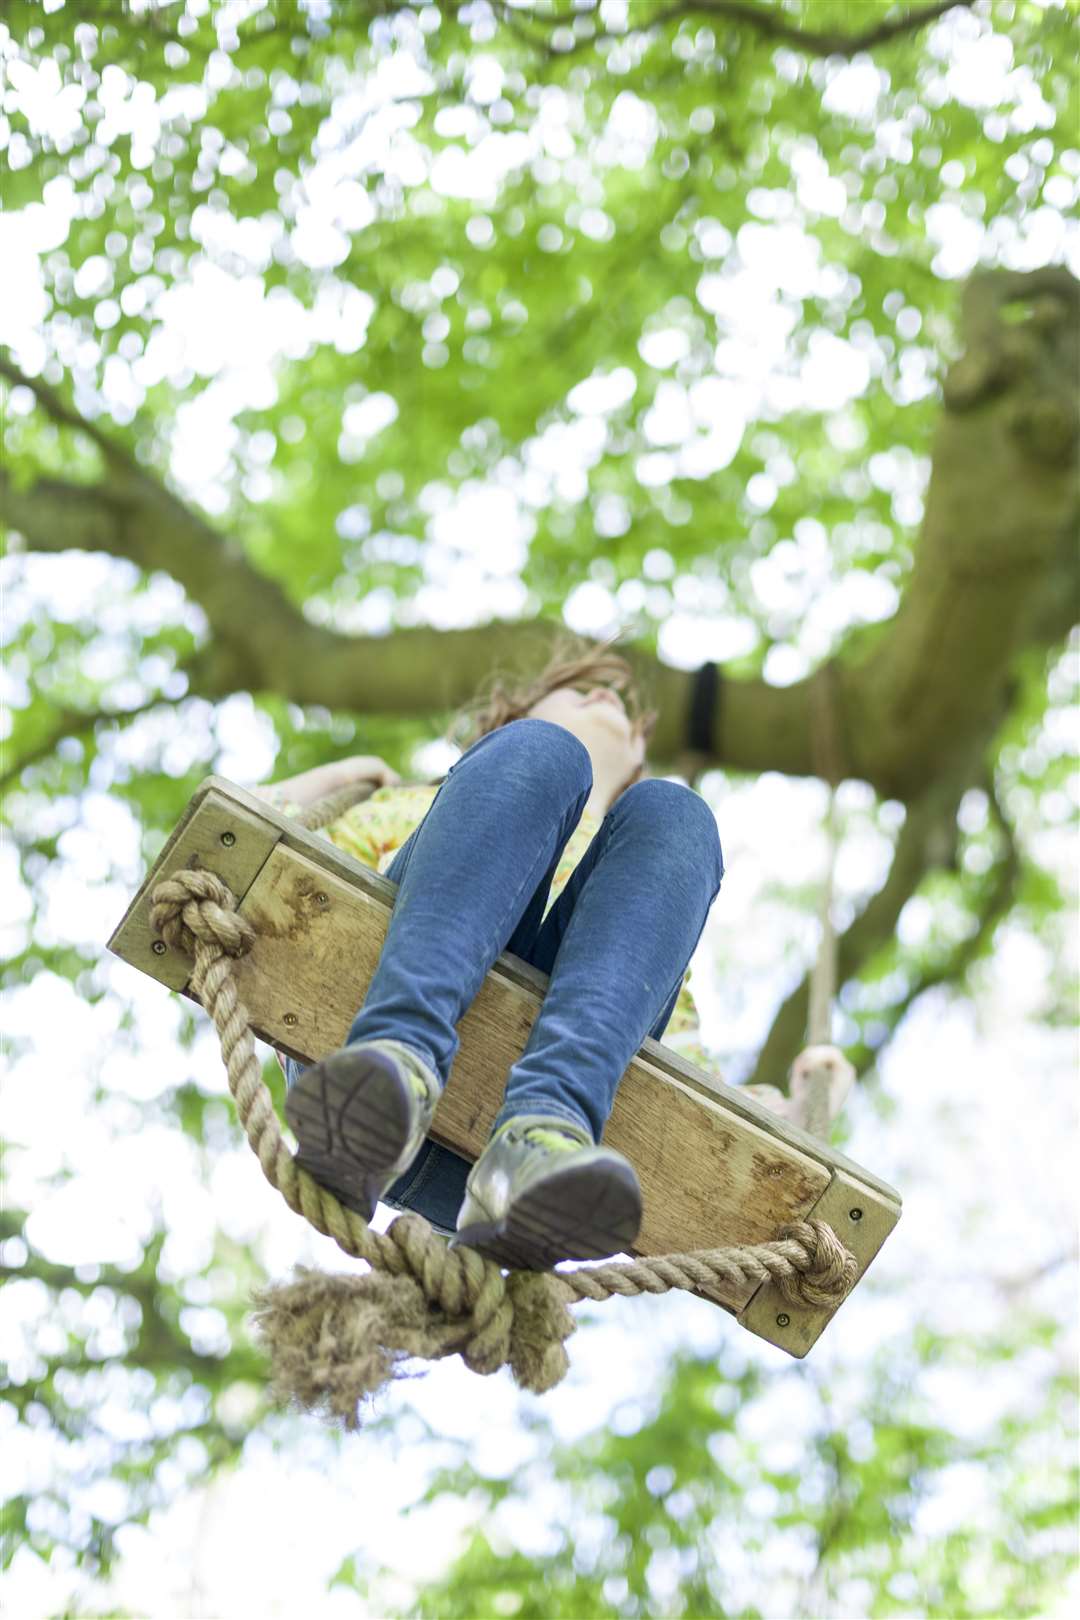 Swing into action this half term Picture: National Trust, Oskar Proctor